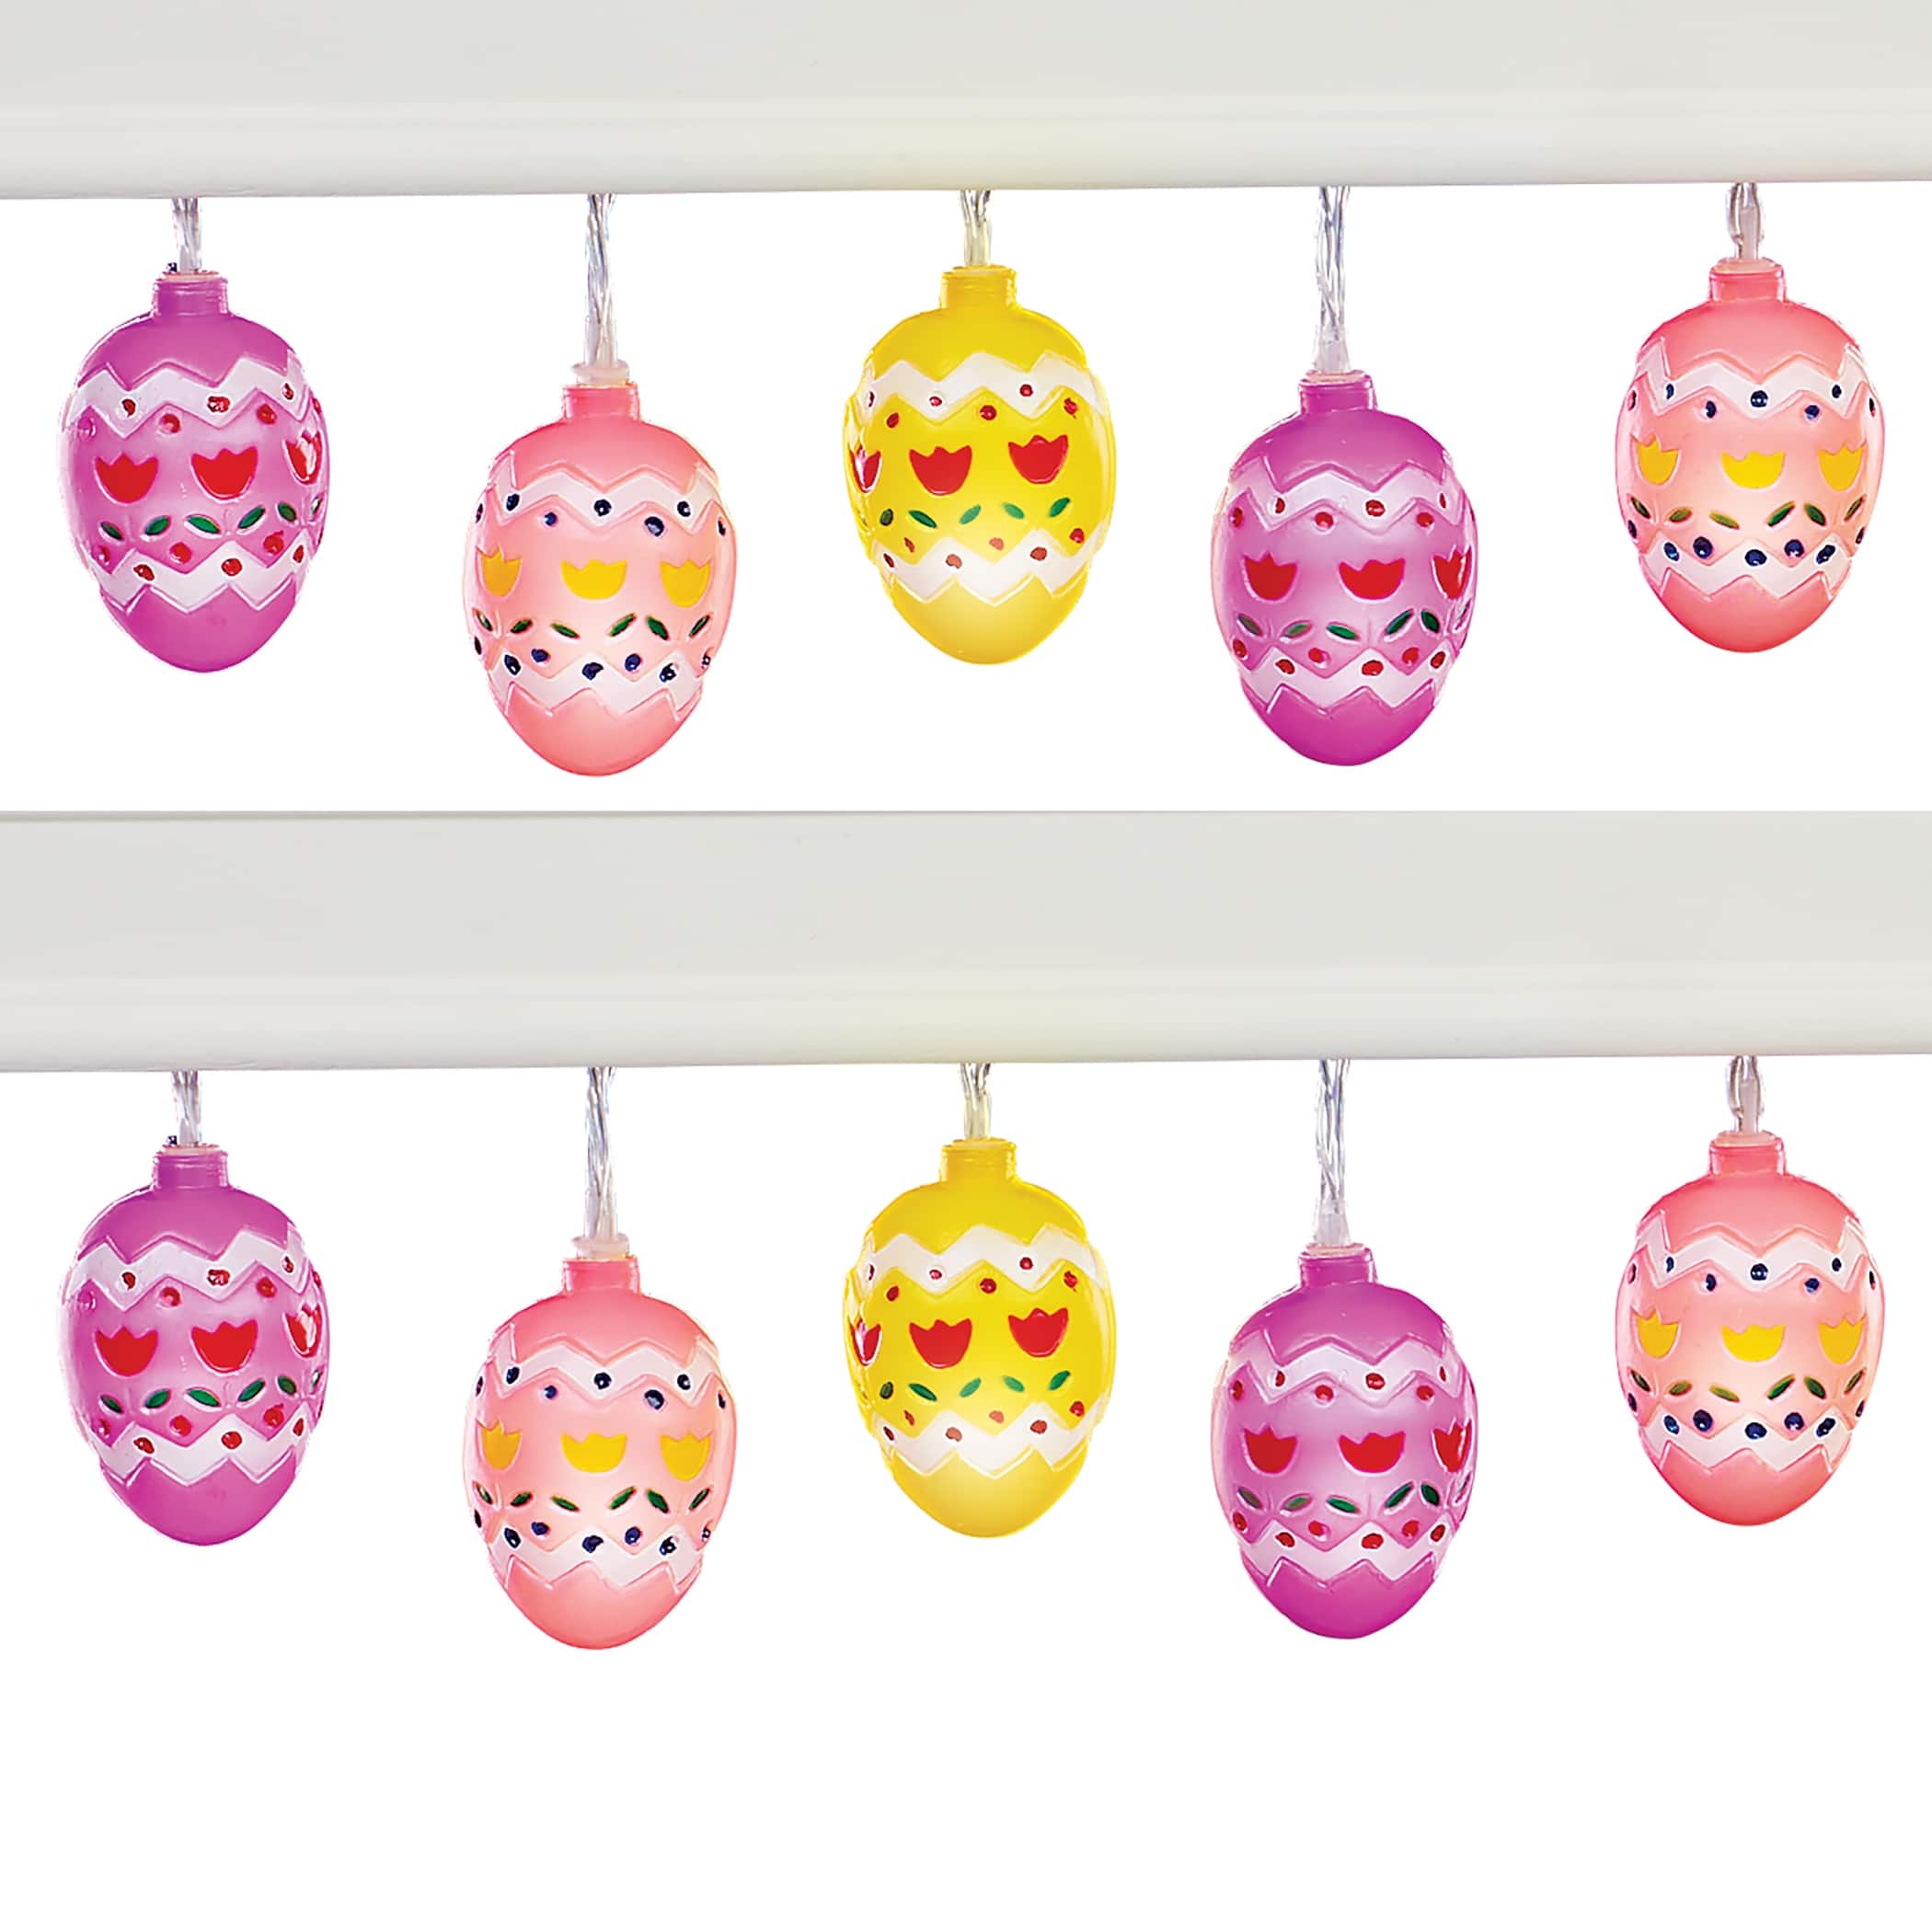 LED Lighted Festive Decorated Easter Eggs String Lights - 8.500 x 4.000 ...